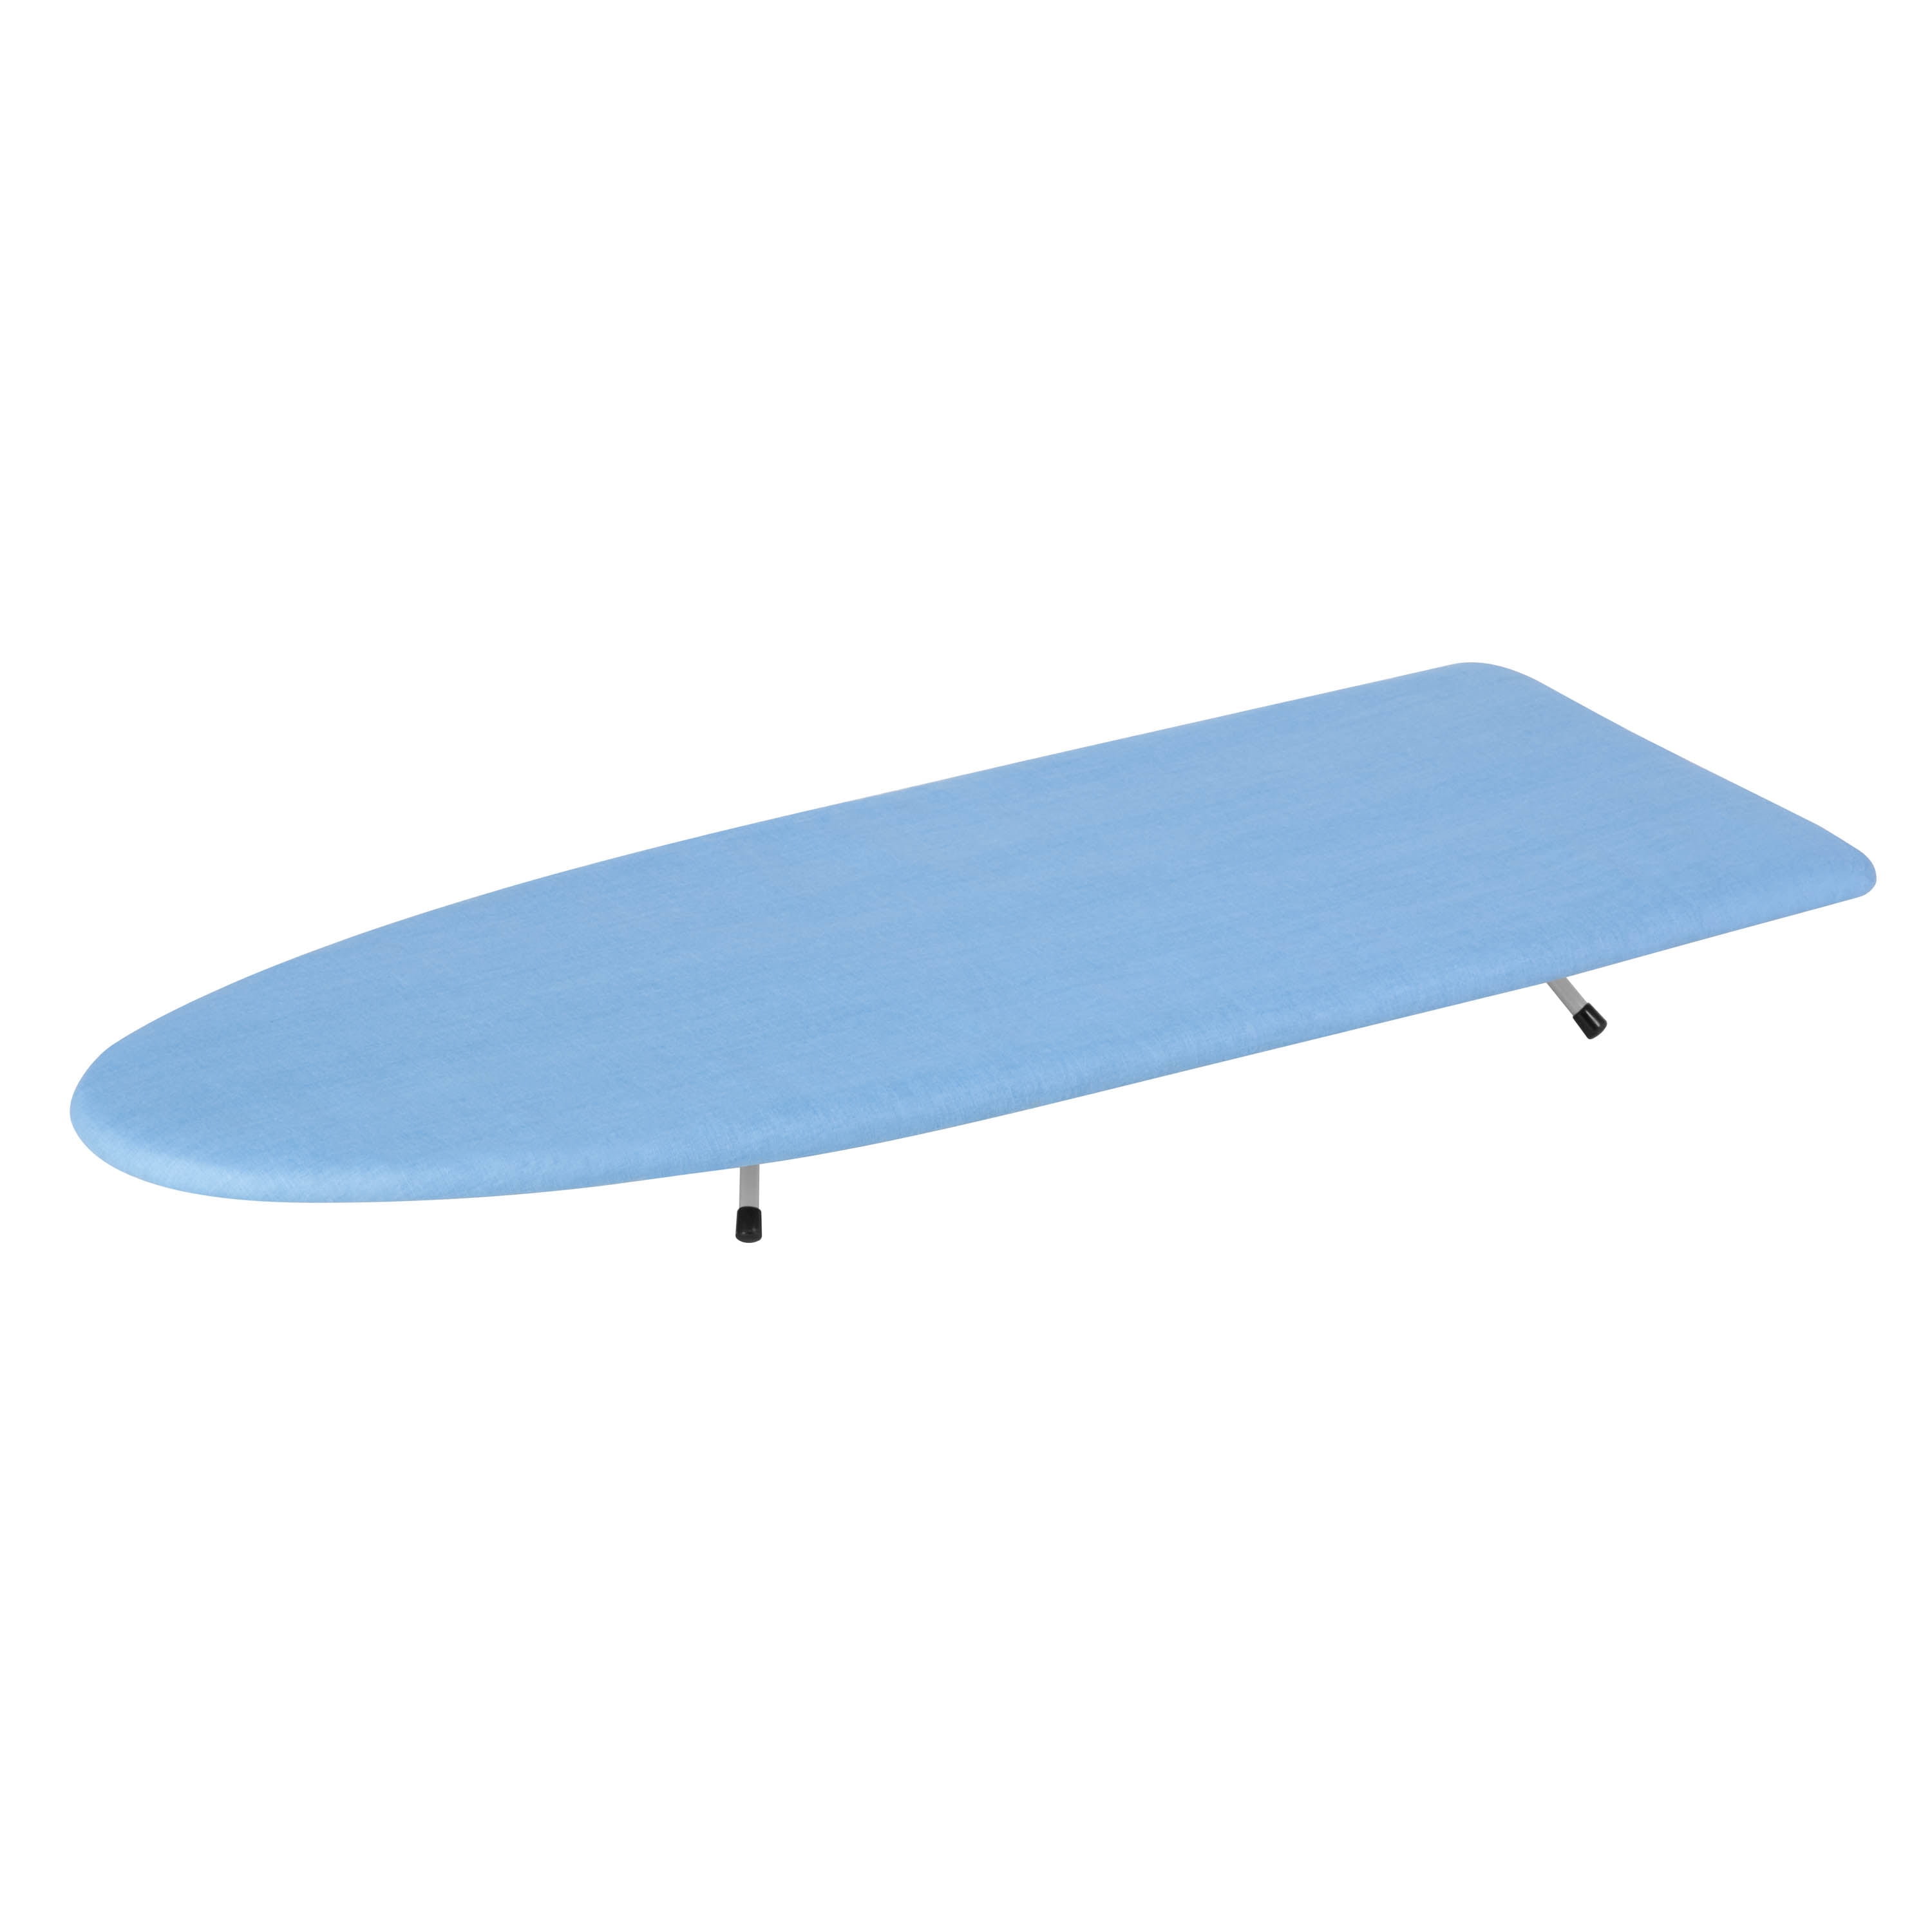 Details about   Counter Top Ironing Board Lightweight Table Mat Steel Frame Folding Portable New 